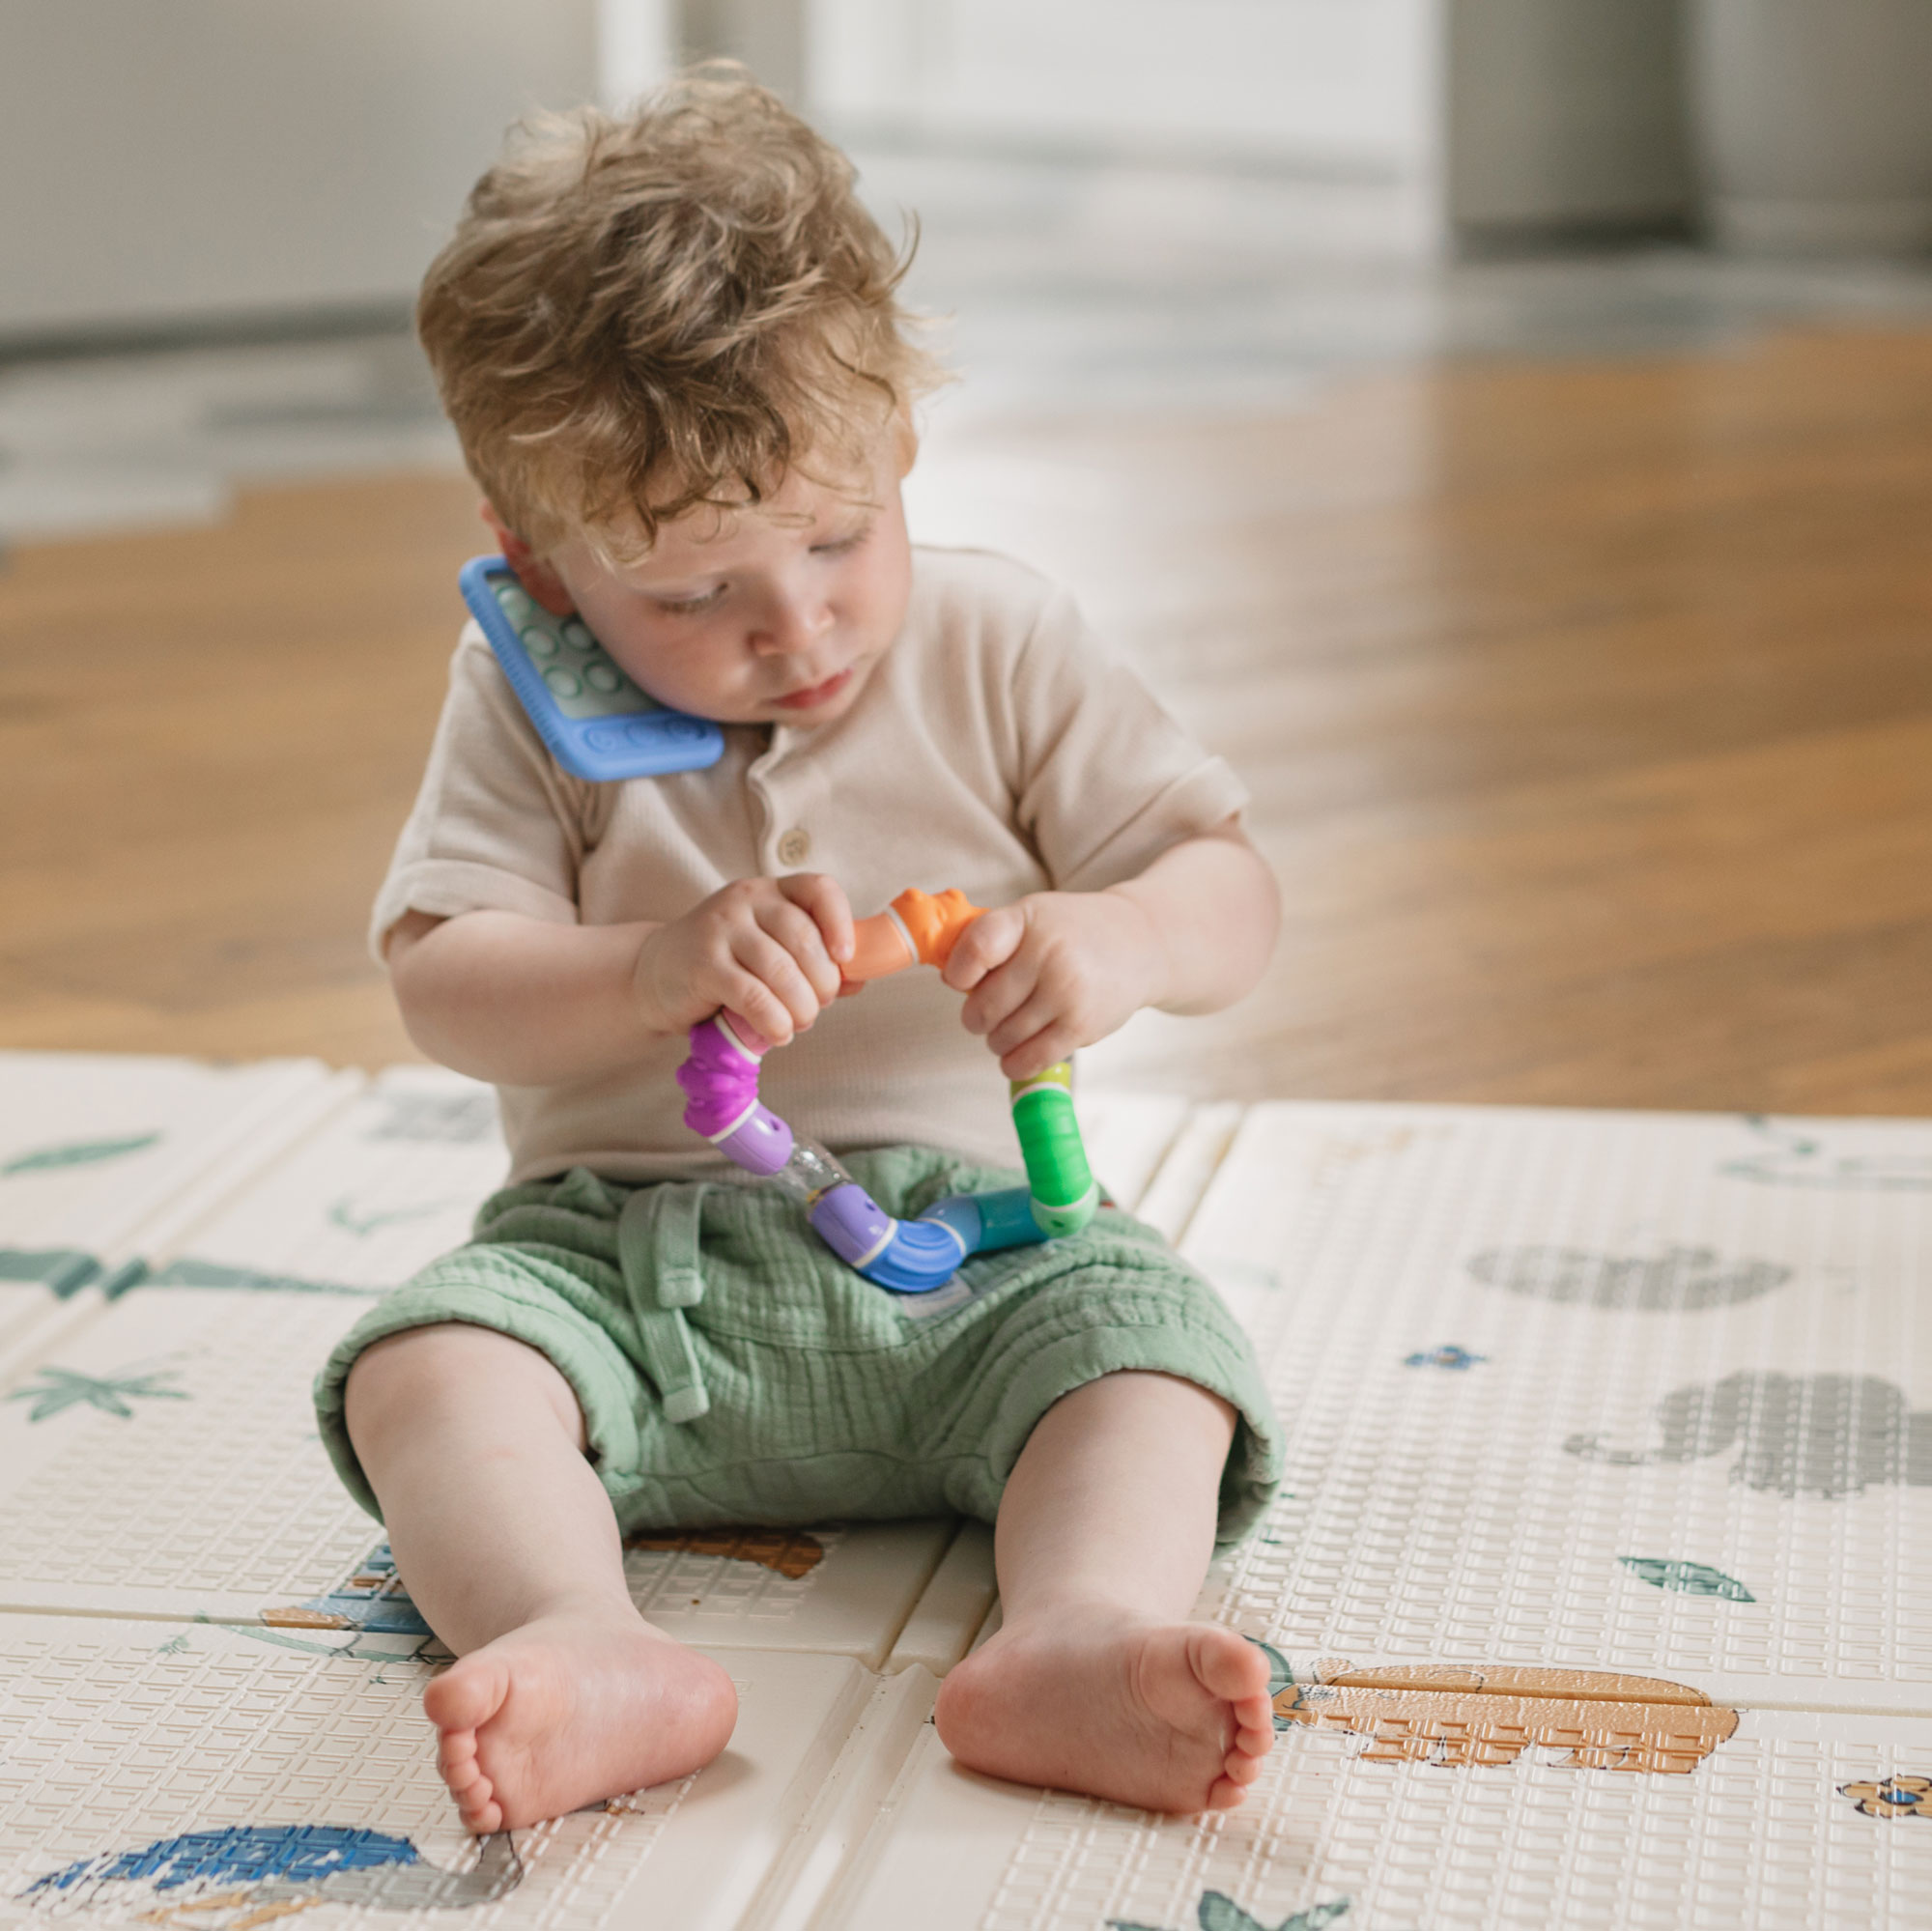 Boy playing with toys on the floor